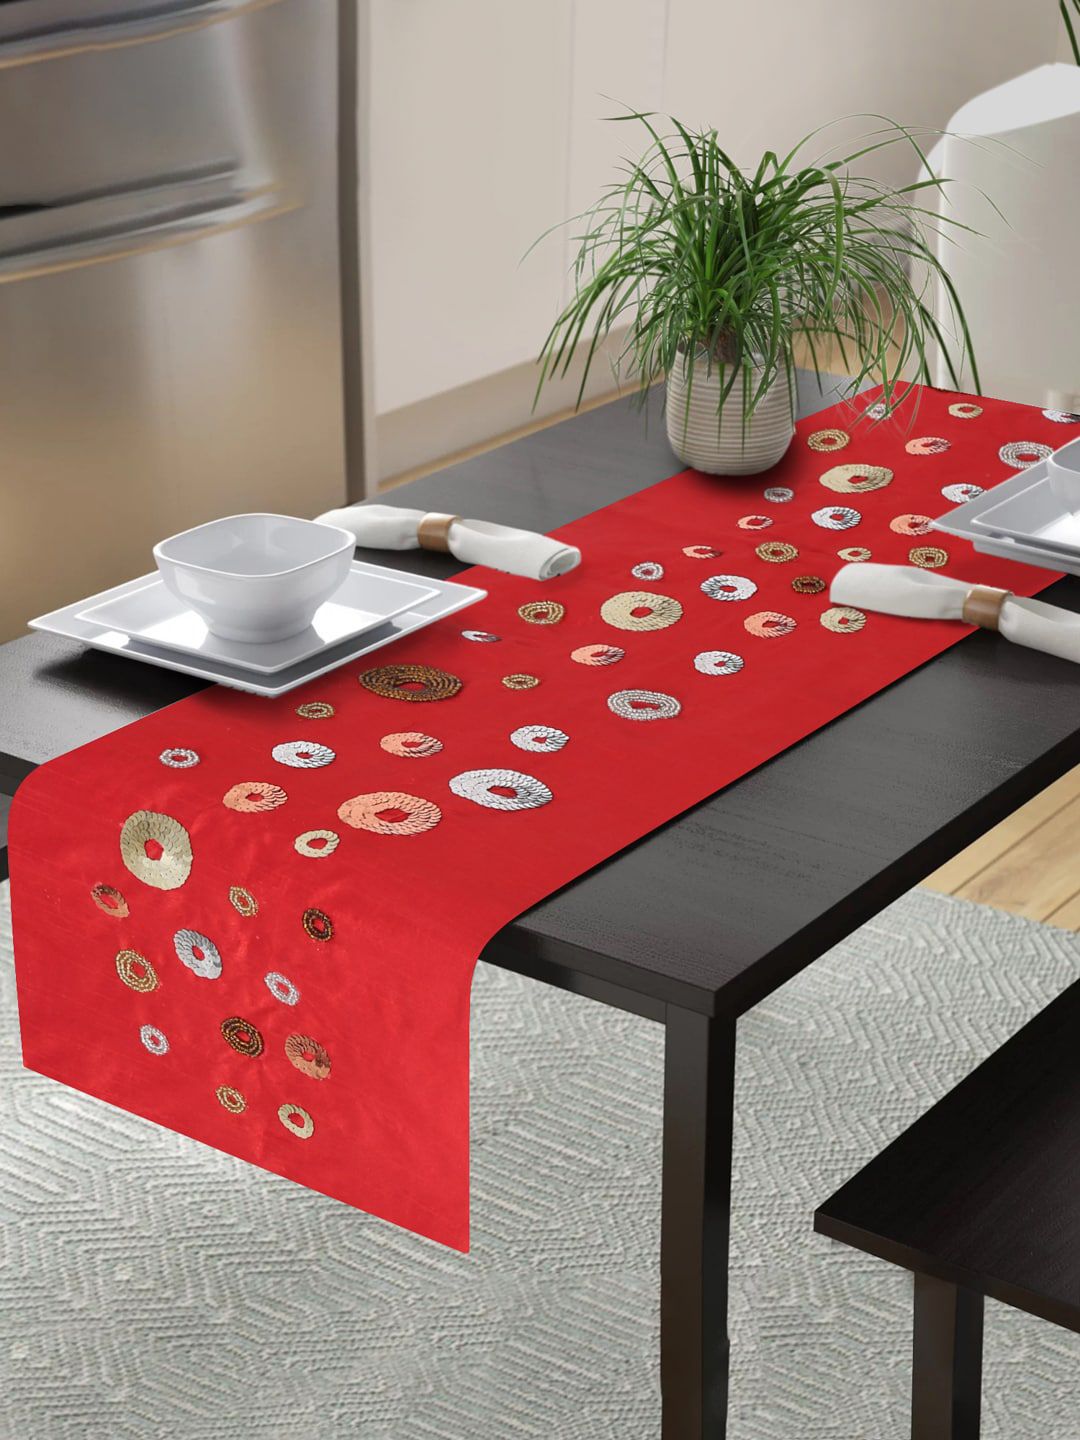 Alina decor Red & Silver-Coloured Embellished 6-Seater Table Runner Price in India